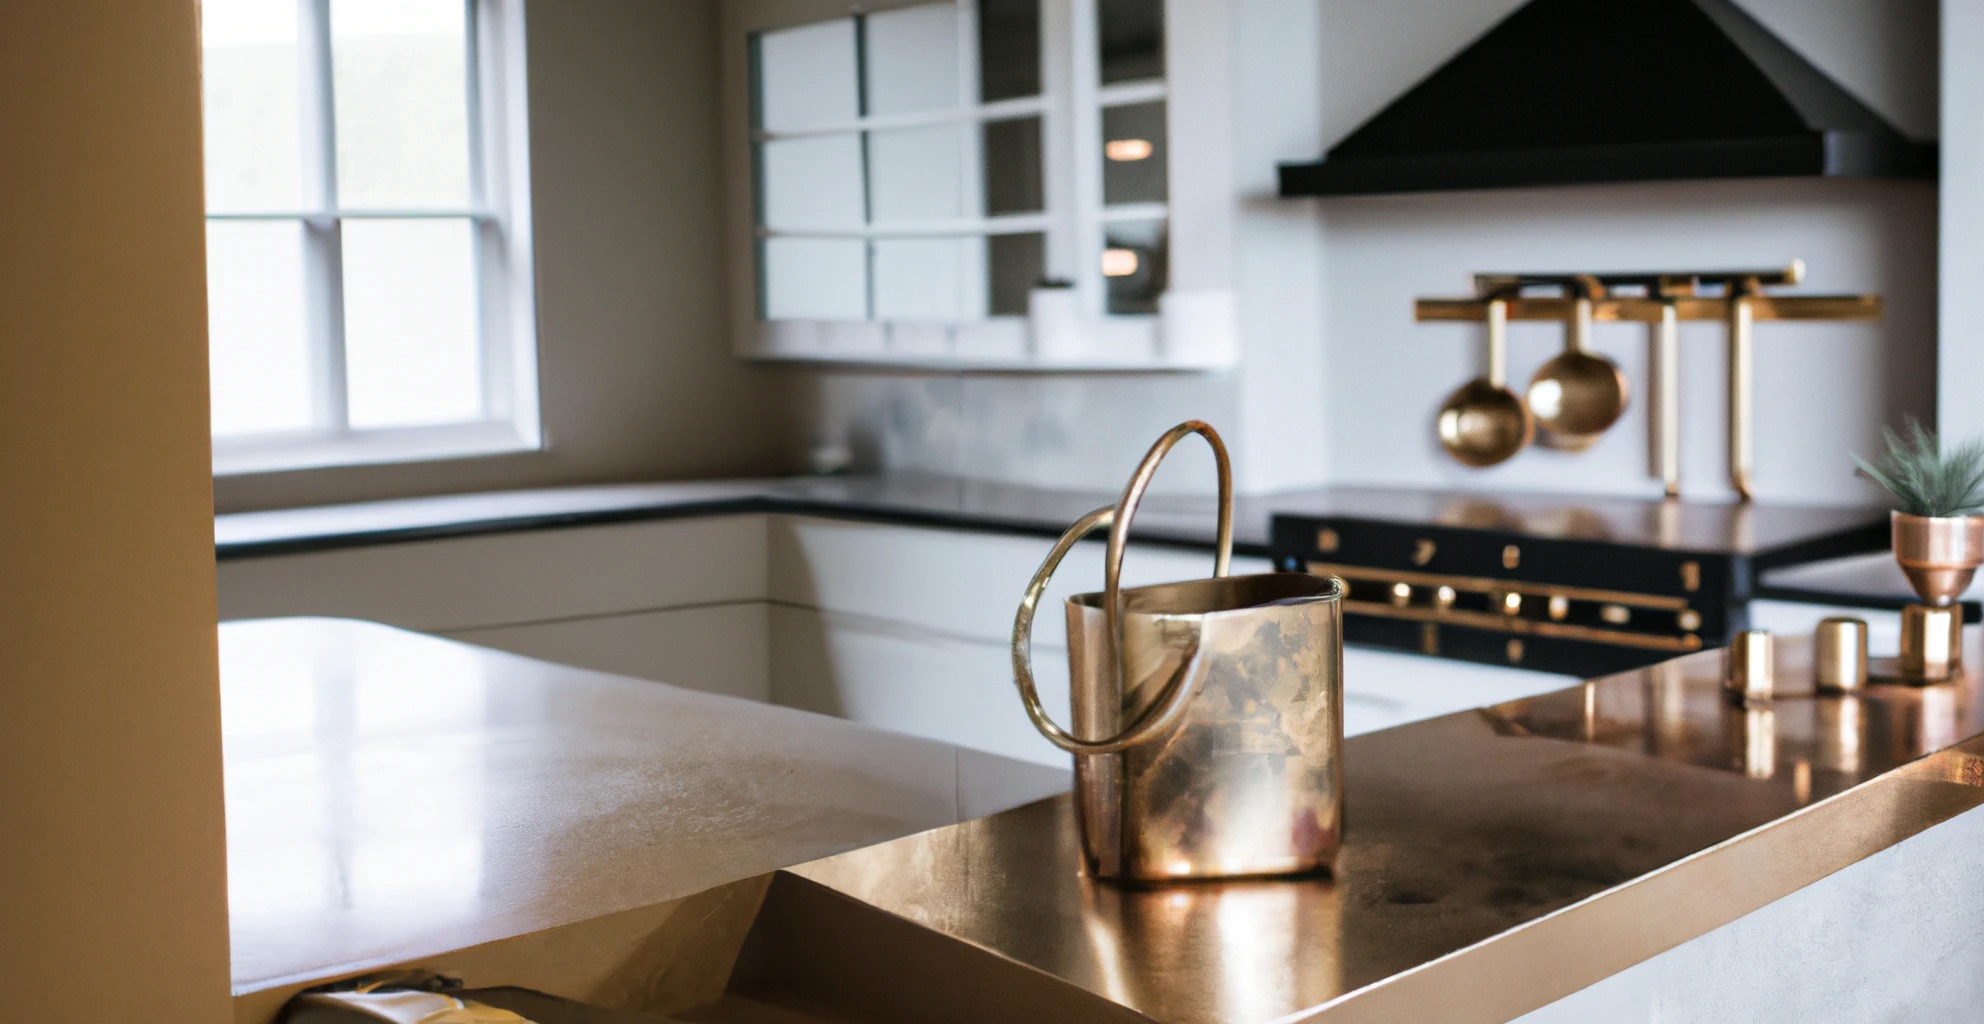 A modern concrete countertop with brass touches